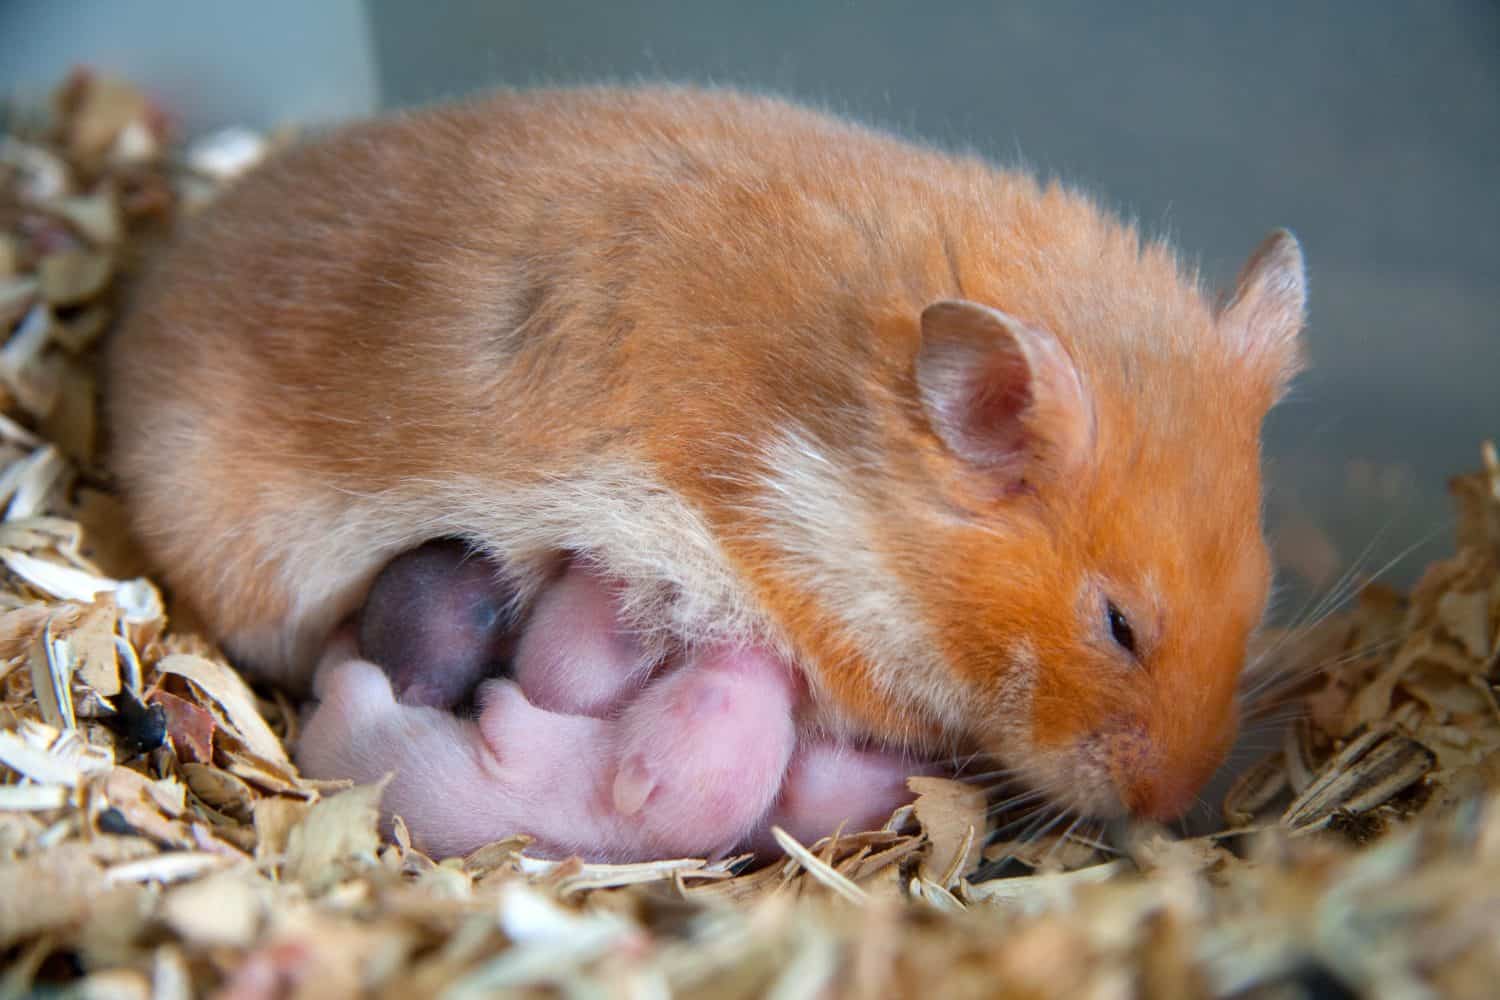 Orange-brown hamster and its baby feeding on mother's milk in a nest full of wood chips